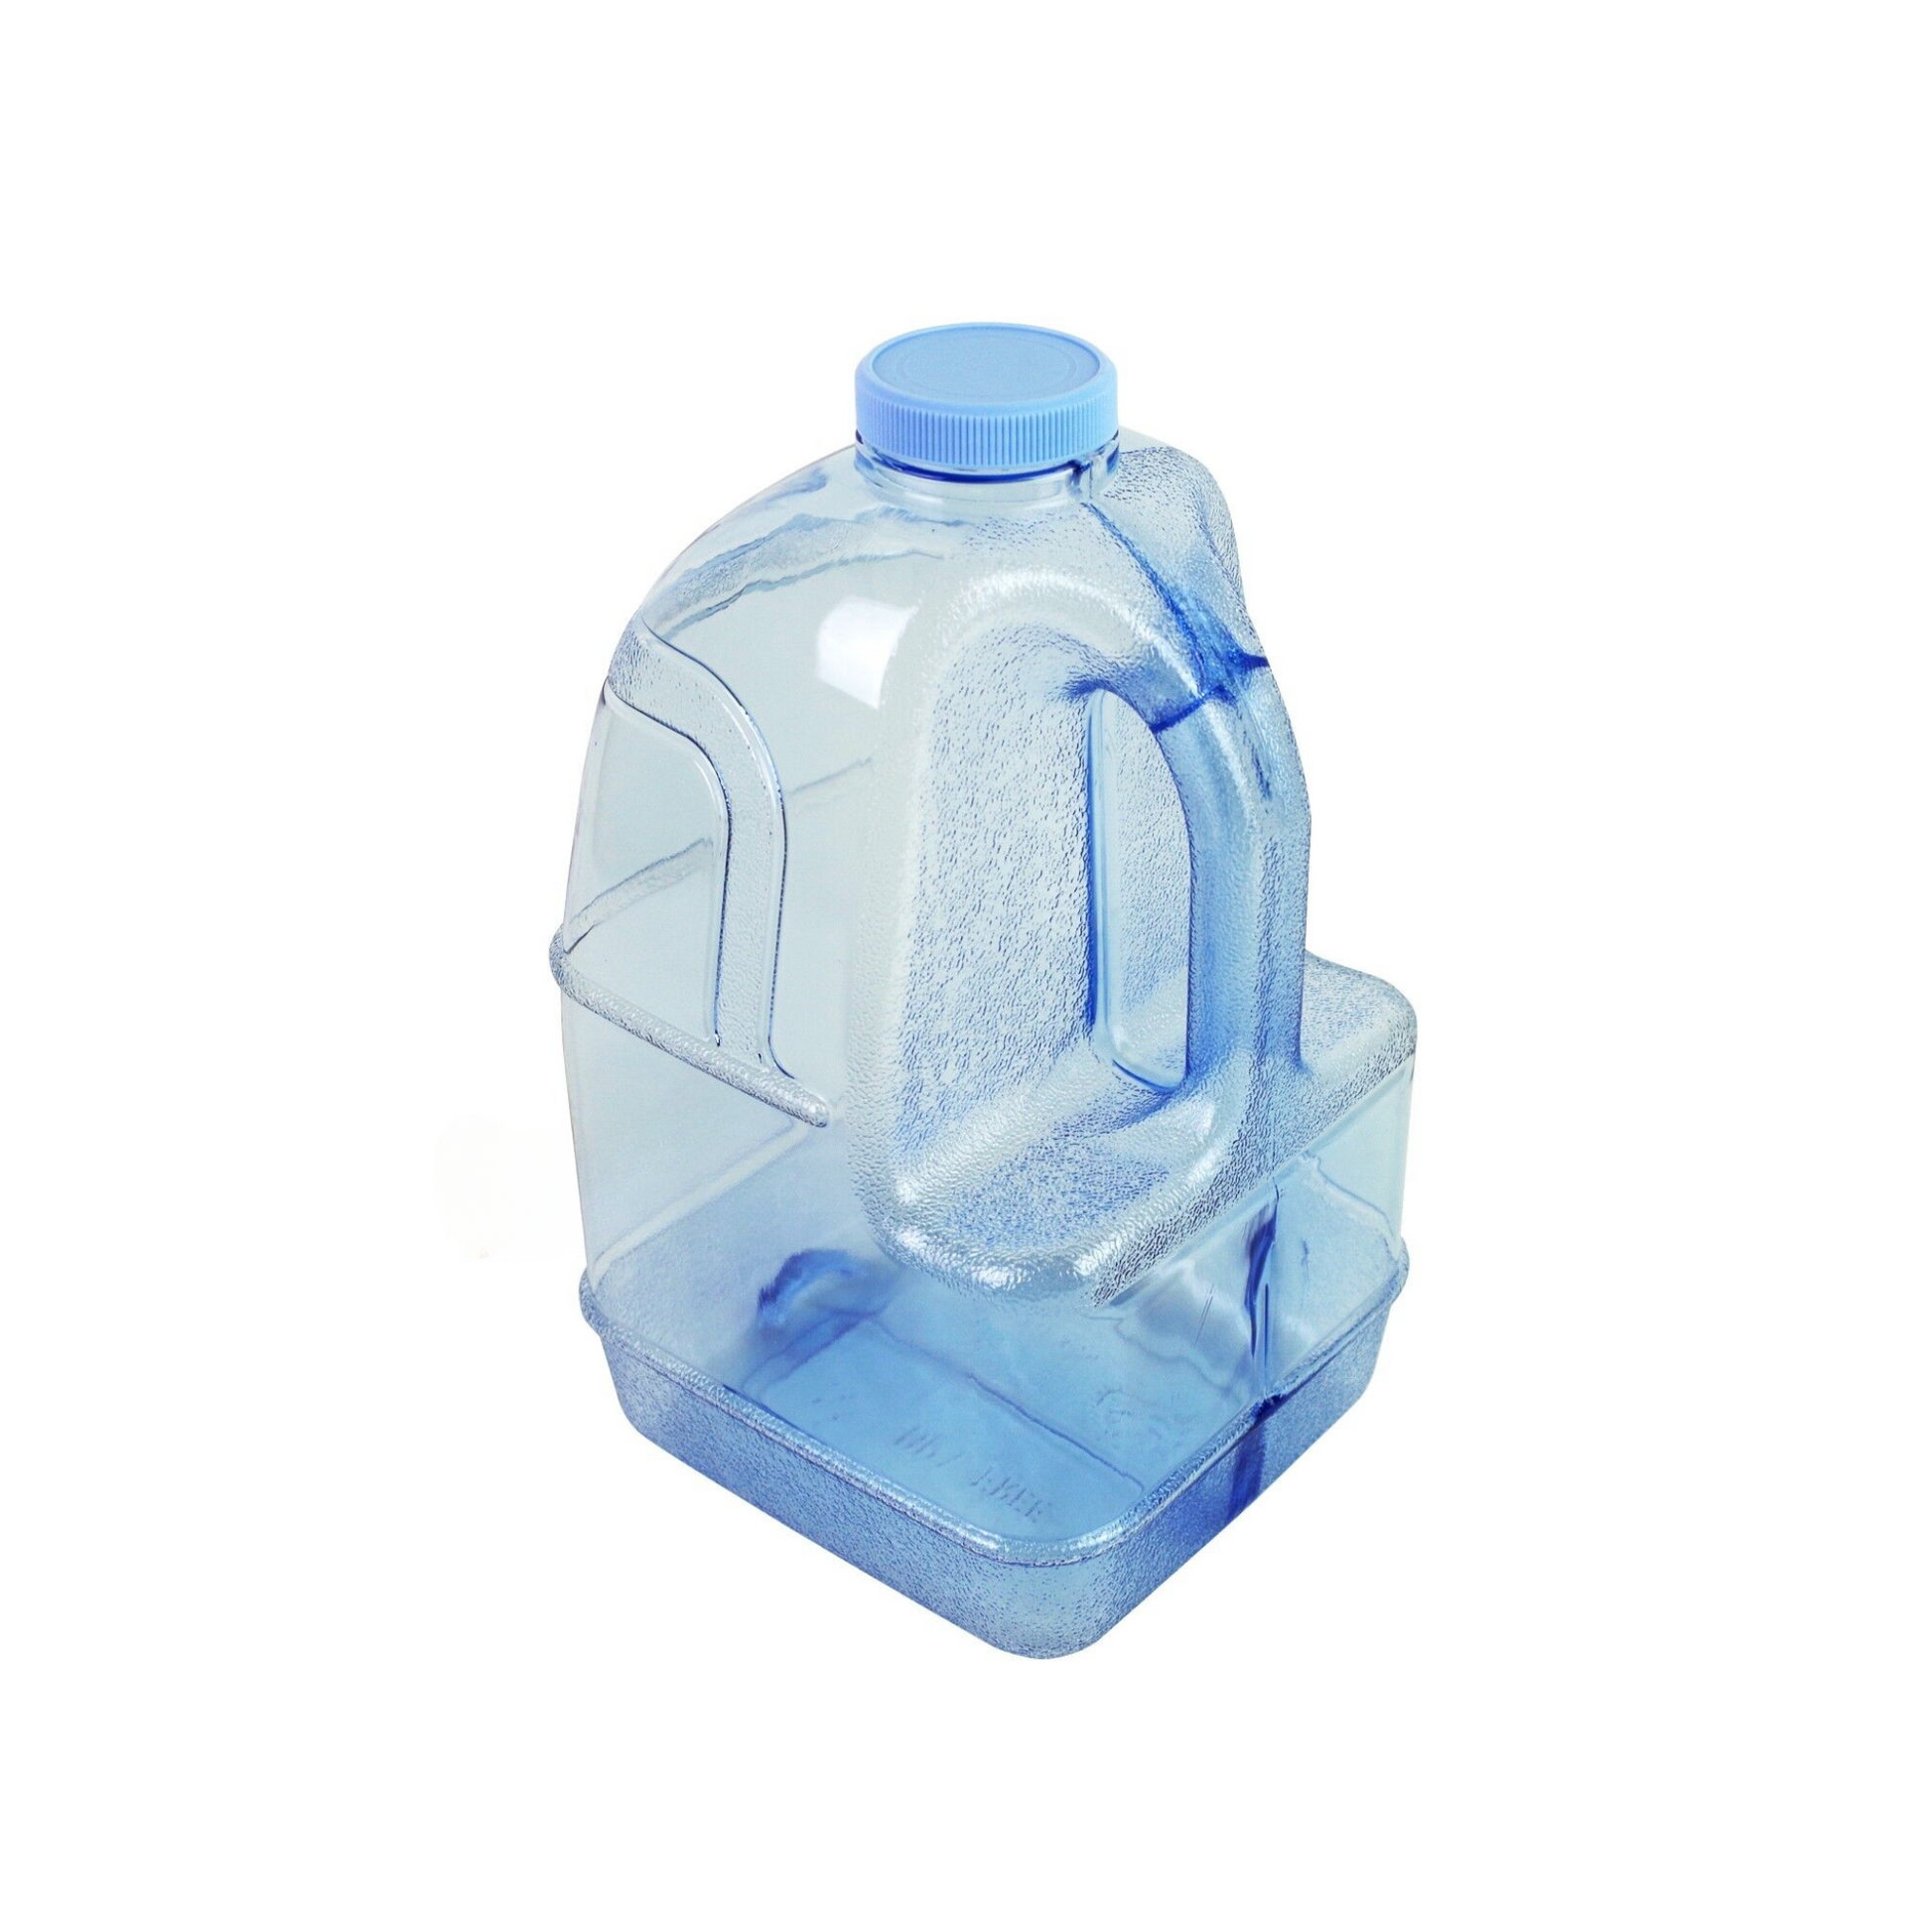 BPA-free clear blue plastic jug with a 1-gallon capacity and built-in handle, perfect for home or office use